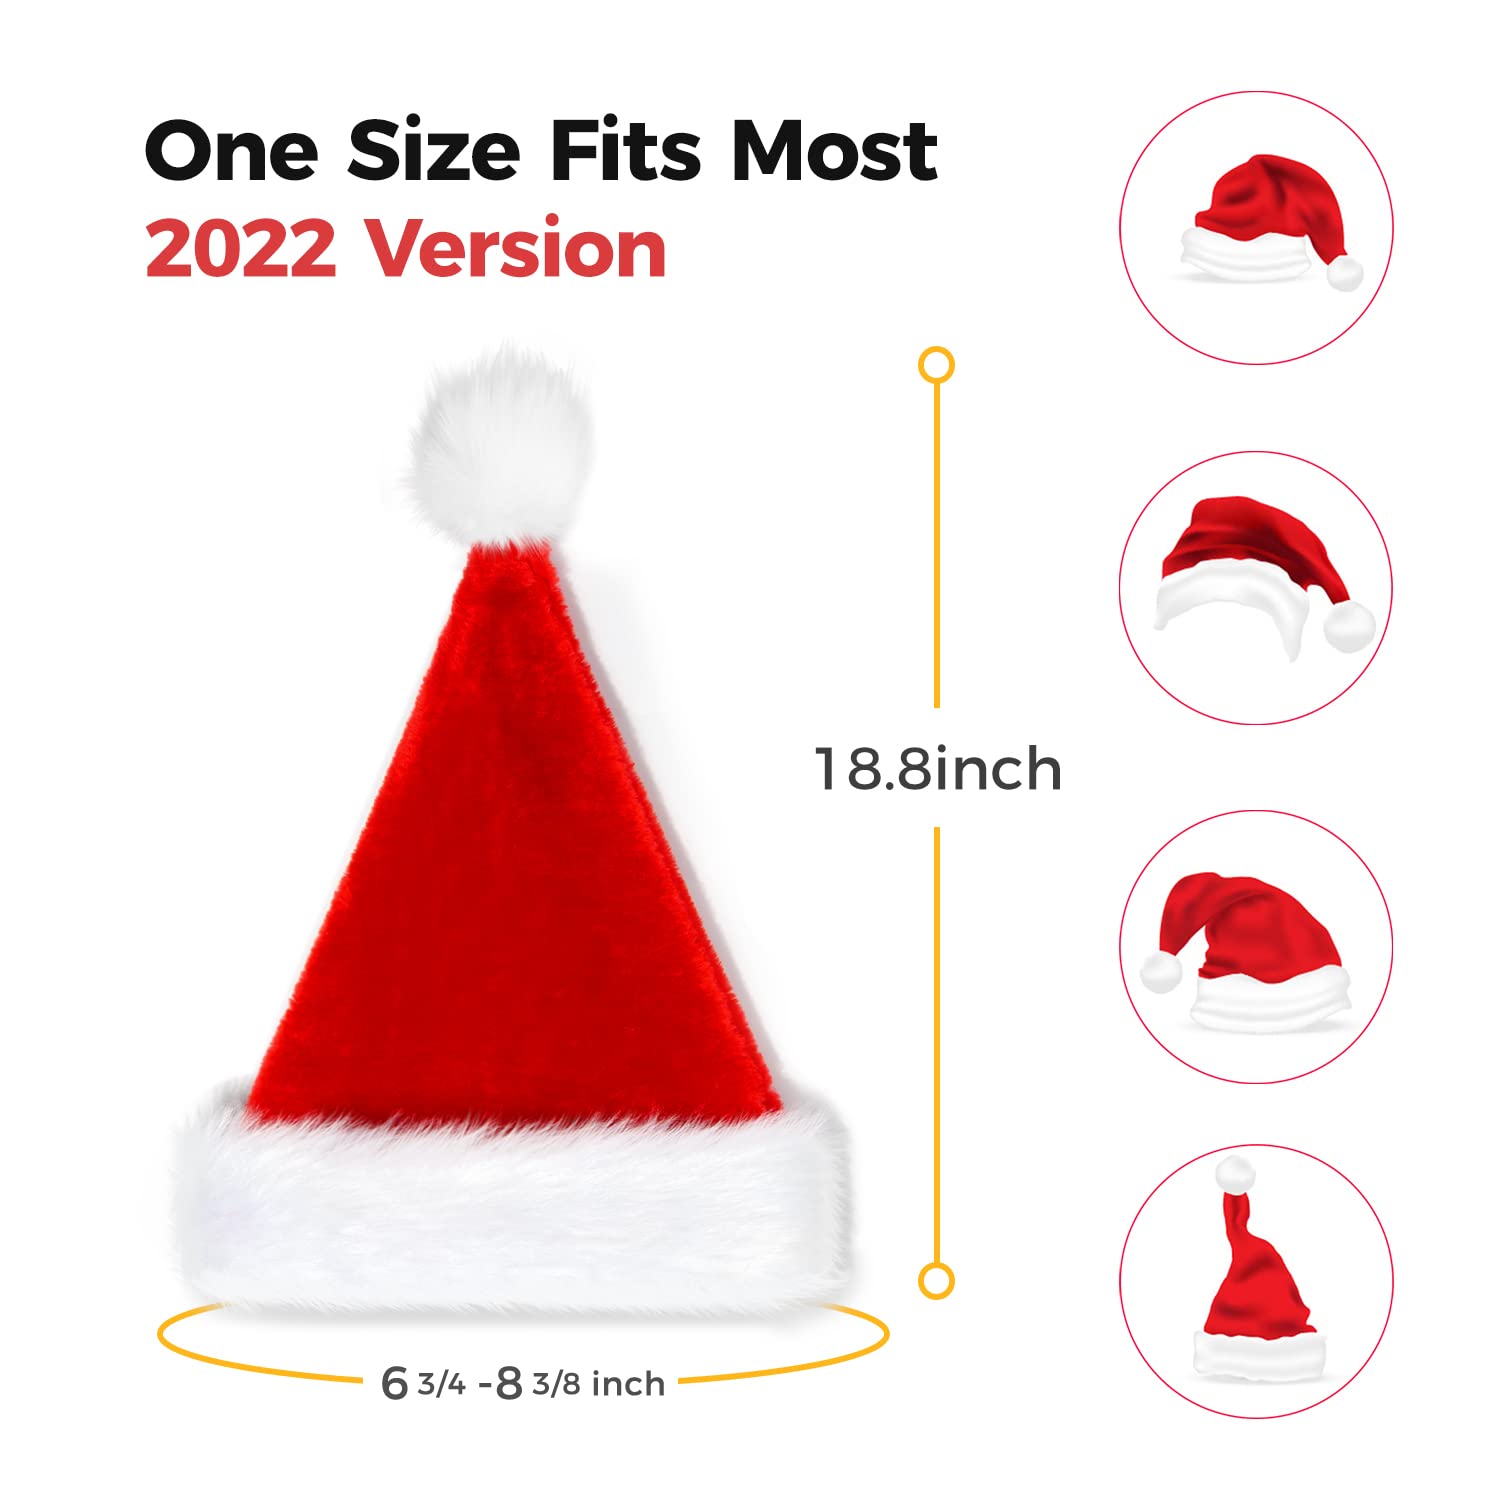 eCraftIndia Red and White Velvet Classic Fur Merry Christmas Hats, Santa Claus Caps for kids and Adults - XMAS Caps, Santa Hats for Christmas, New Year, Festive Holiday Party Celebration (Set of 30) 7